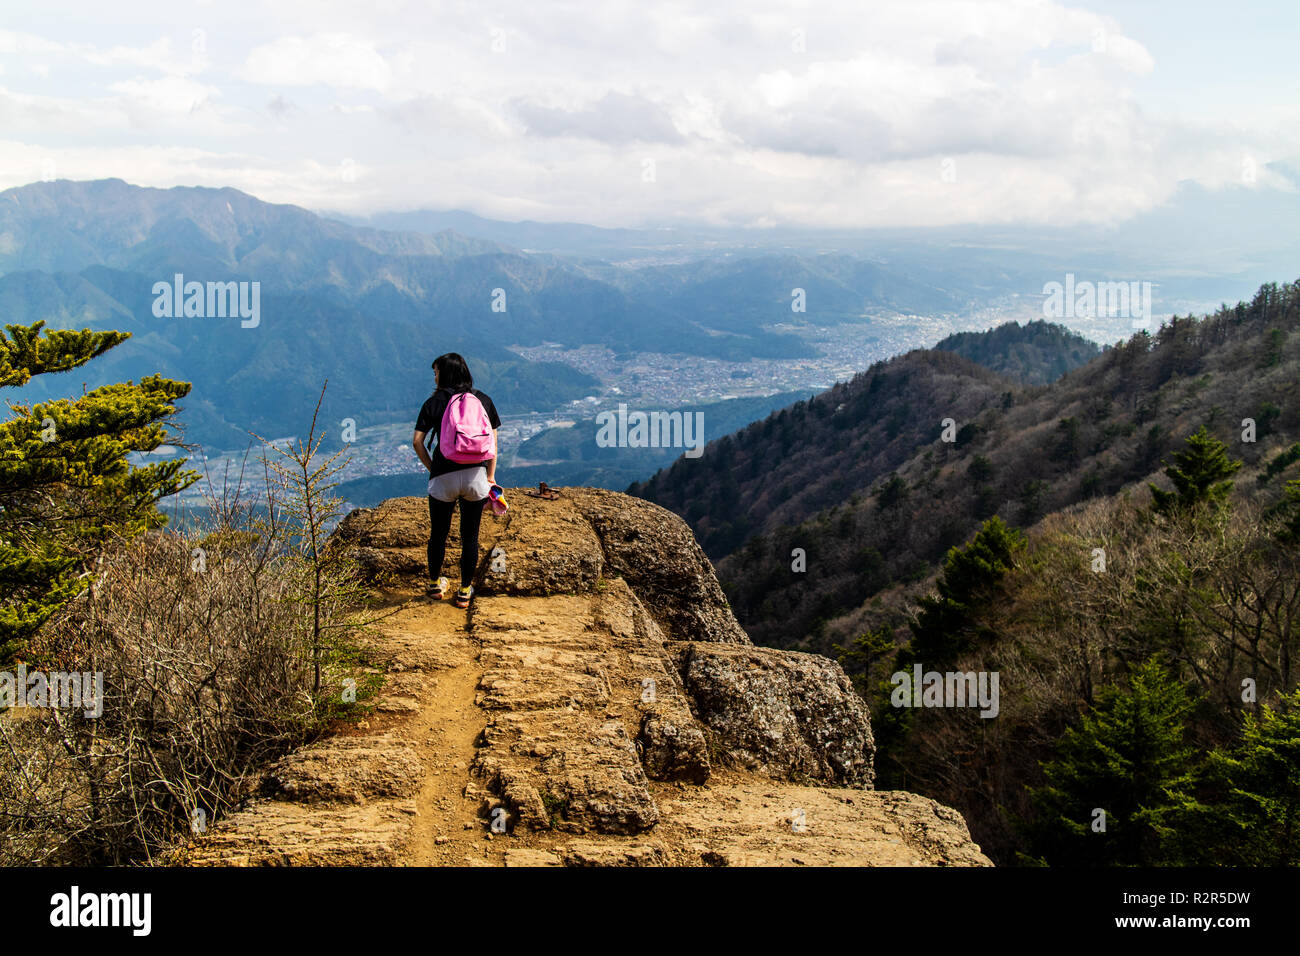 A woman admiring the spectacular view after a long hike taken from the mountains surrounding Mt. Fuji Stock Photo